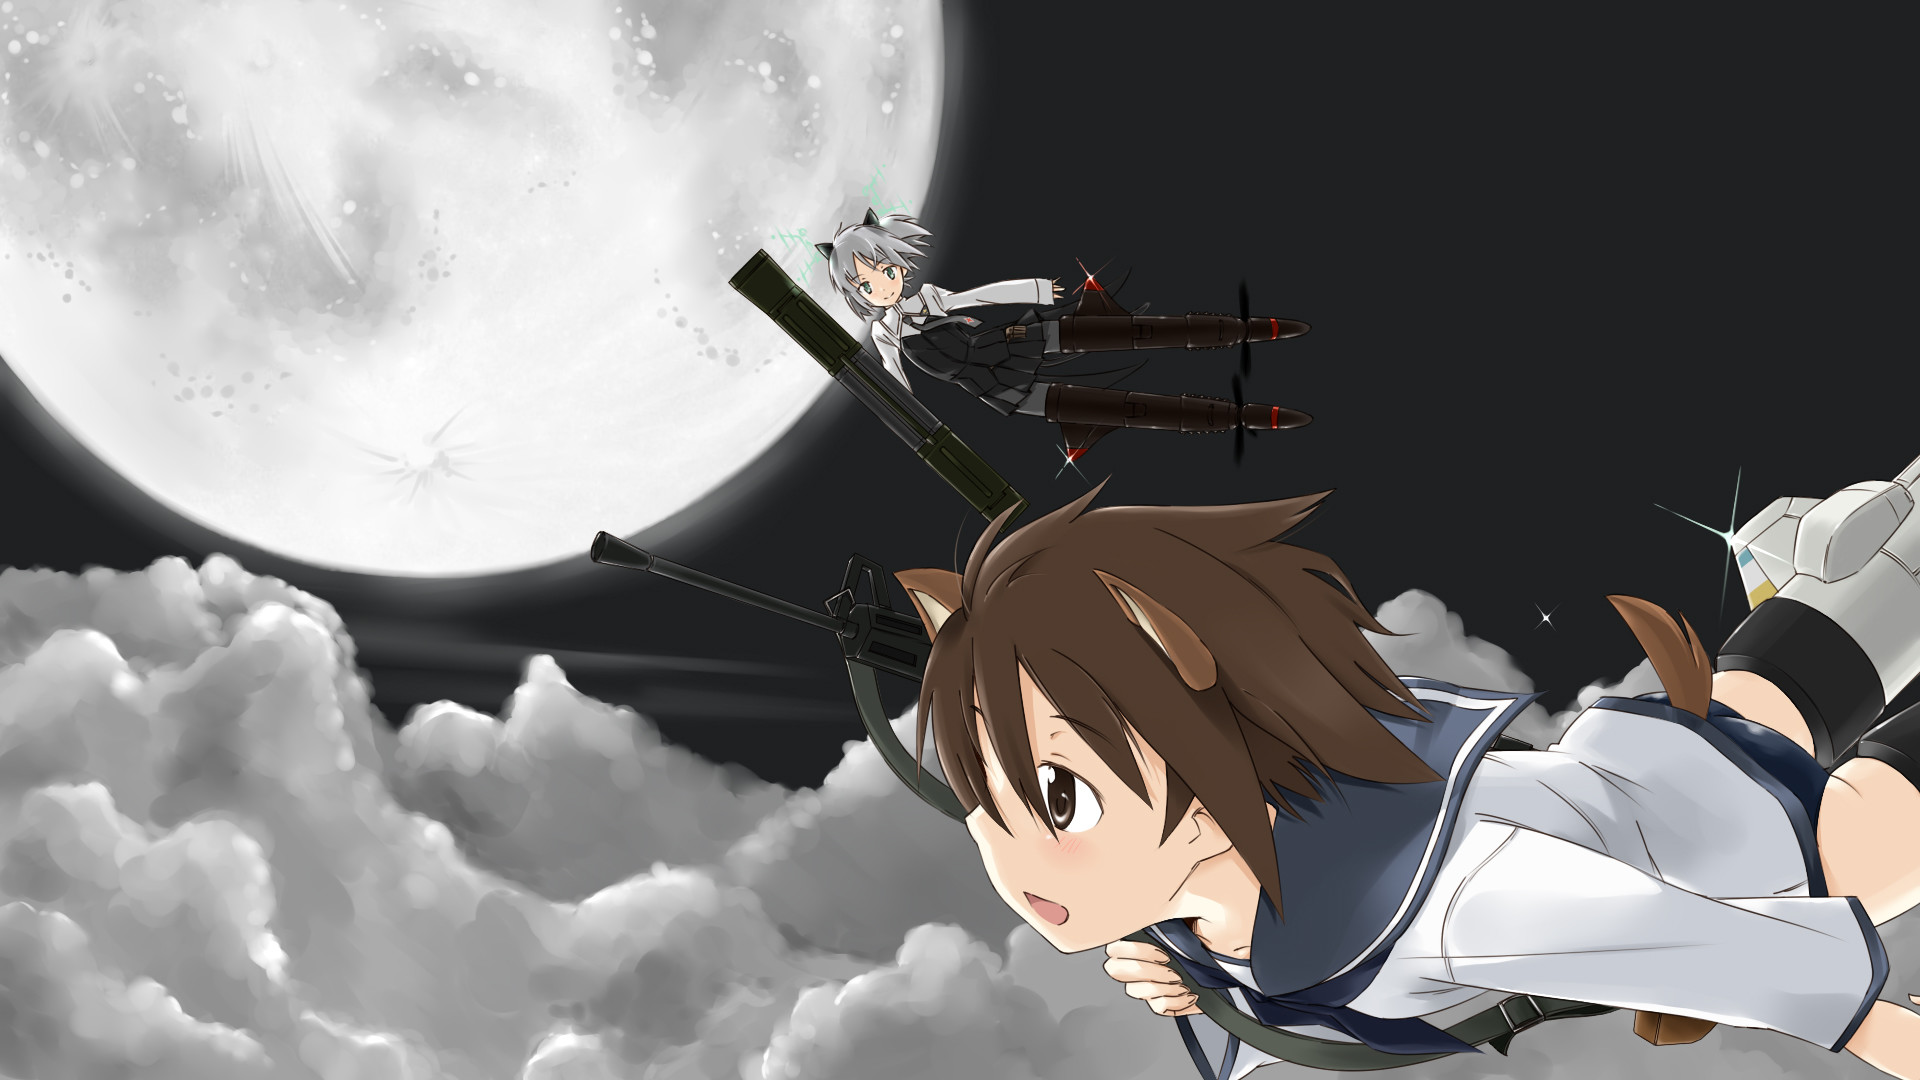 1920x1080 Anime - Strike Witches Wallpaper